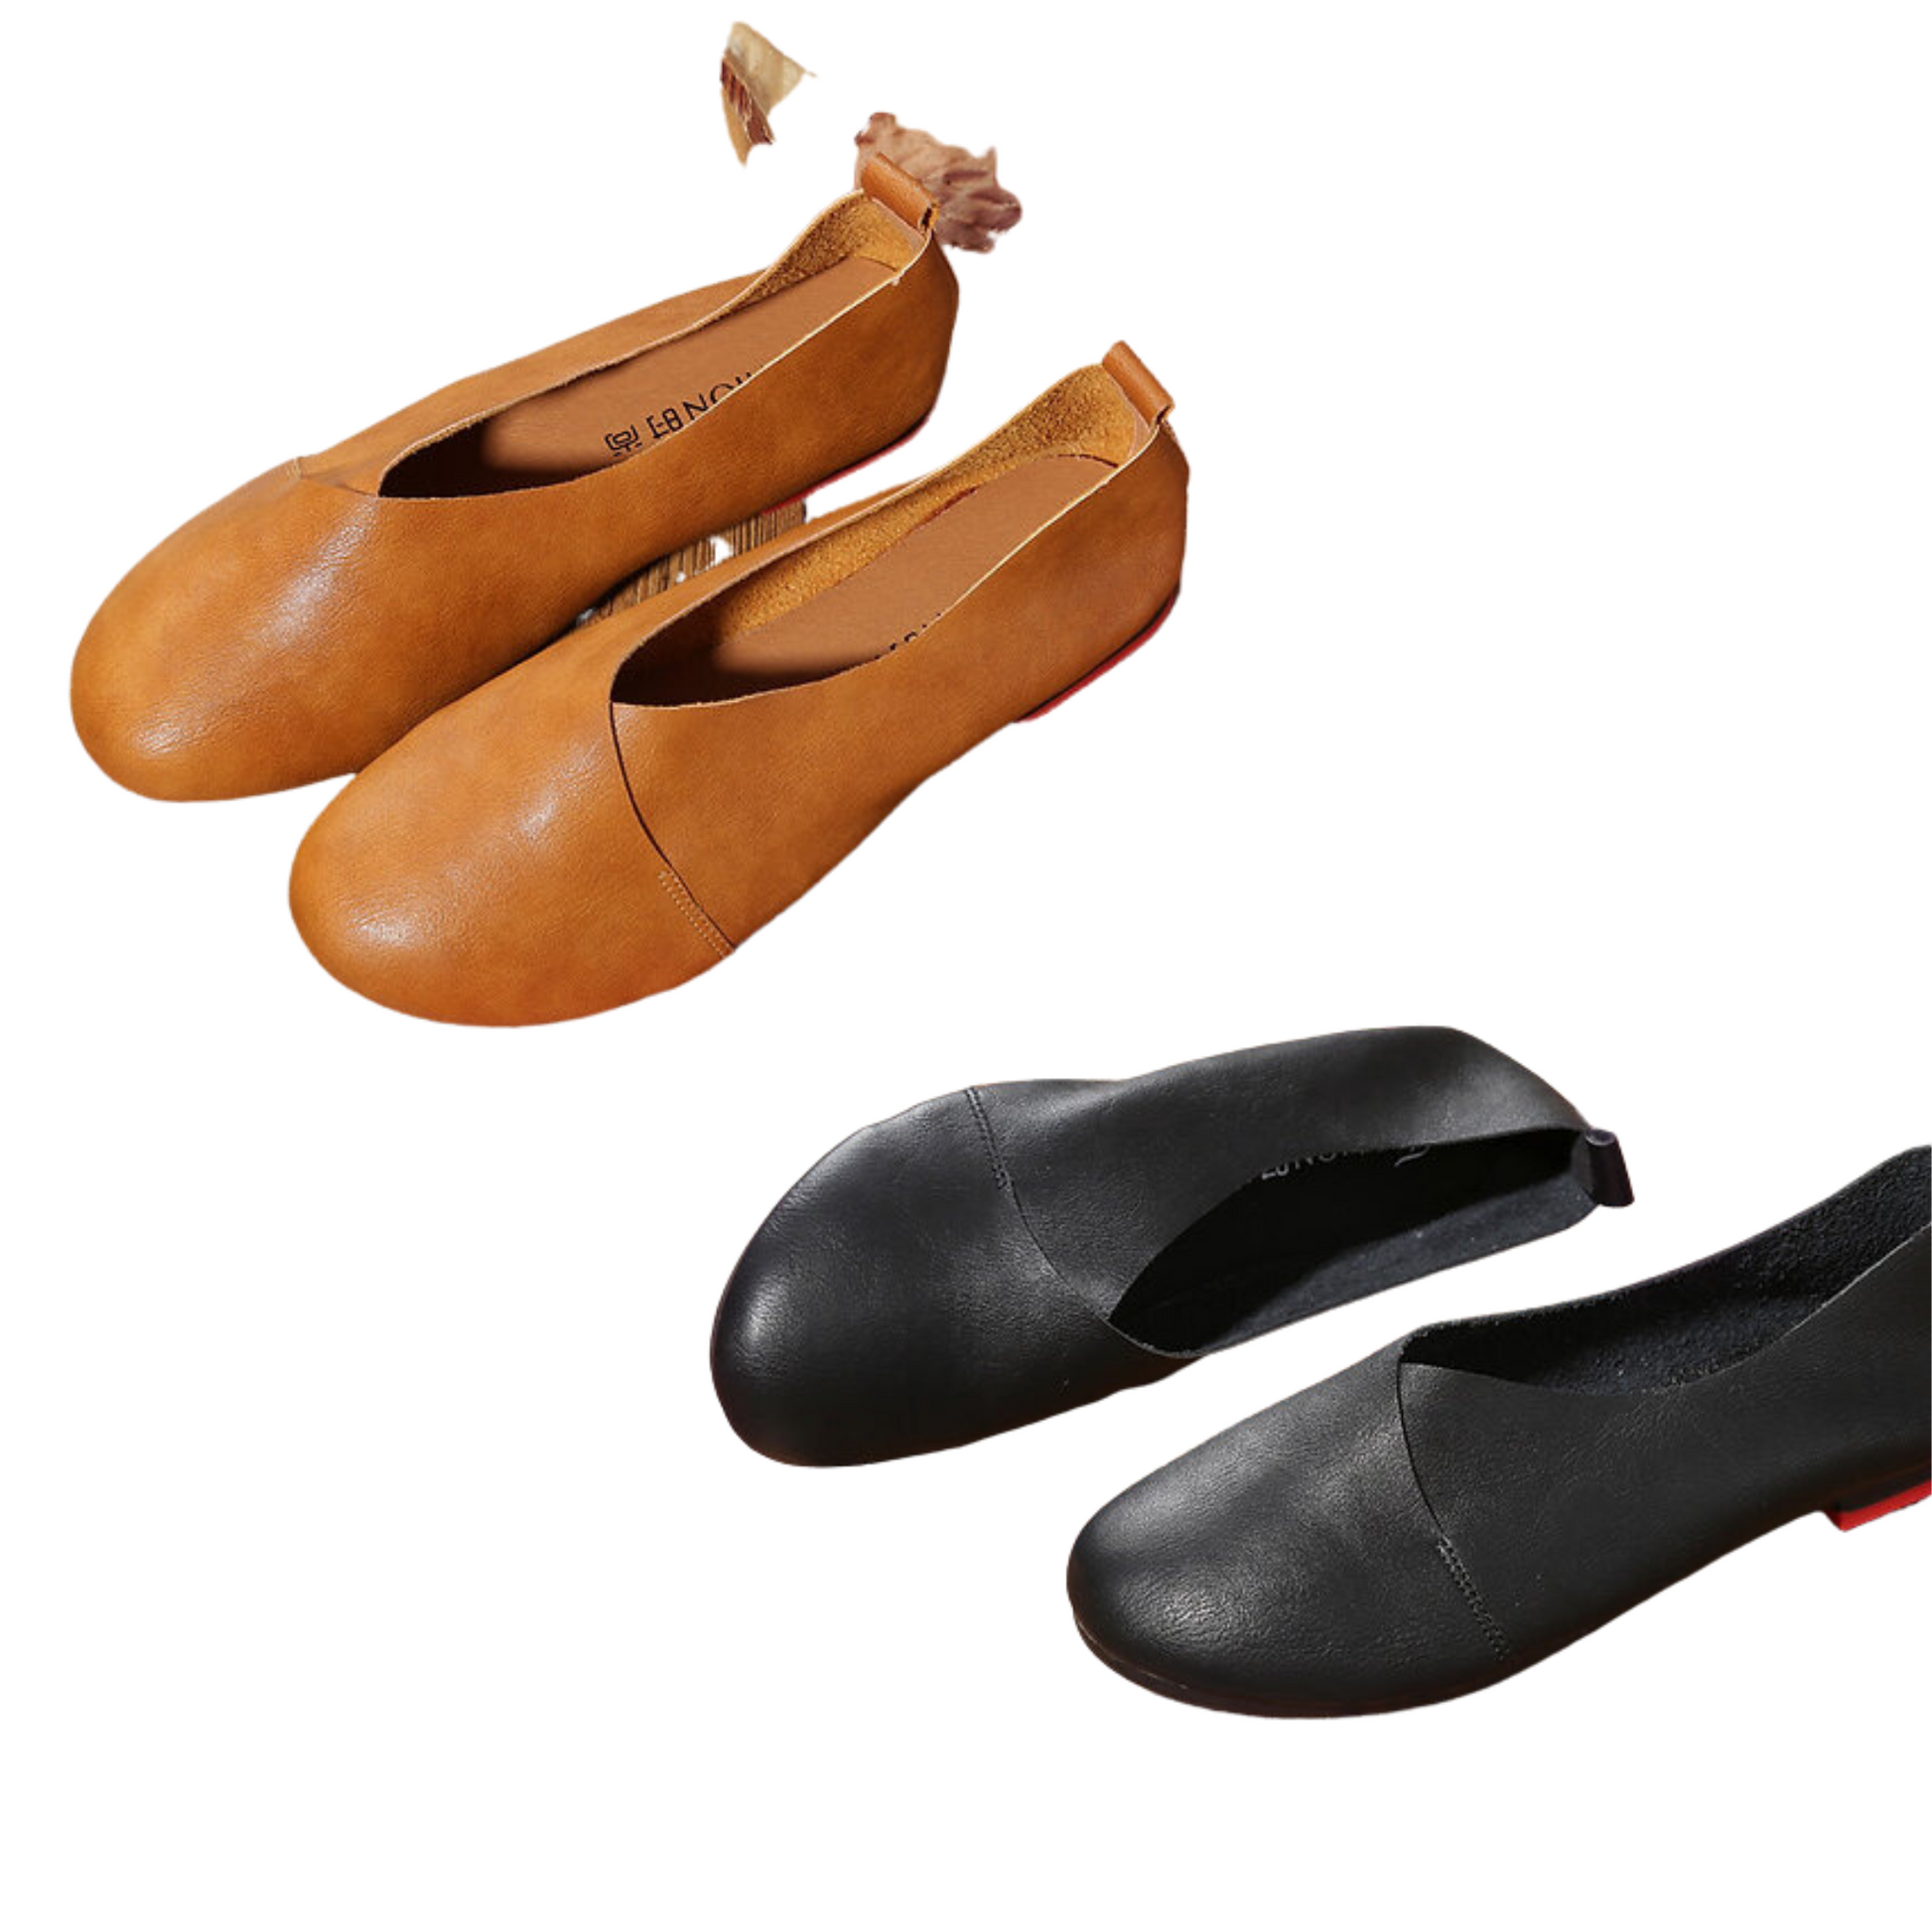 These Casual Ladies Flats offer a comfortable fit and classic style. With a closed-toe design and available colors of black and camel, the perfect look and fit is achievable.